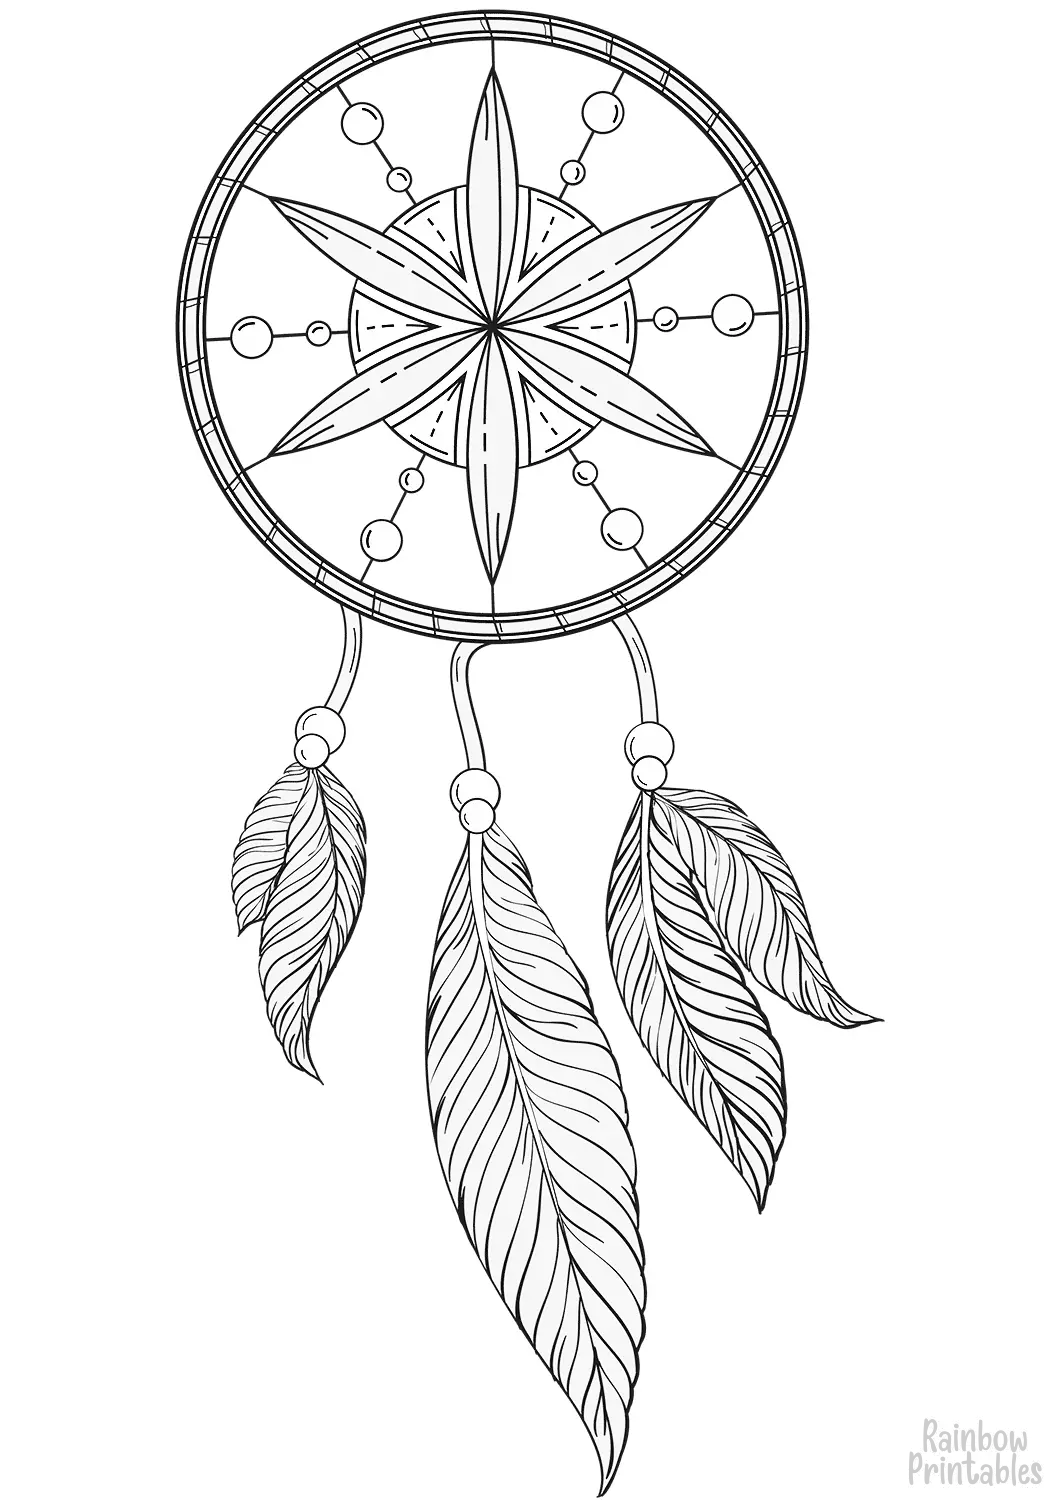 Indian-Dream-Catcher Good Luck Charm Coloring Page